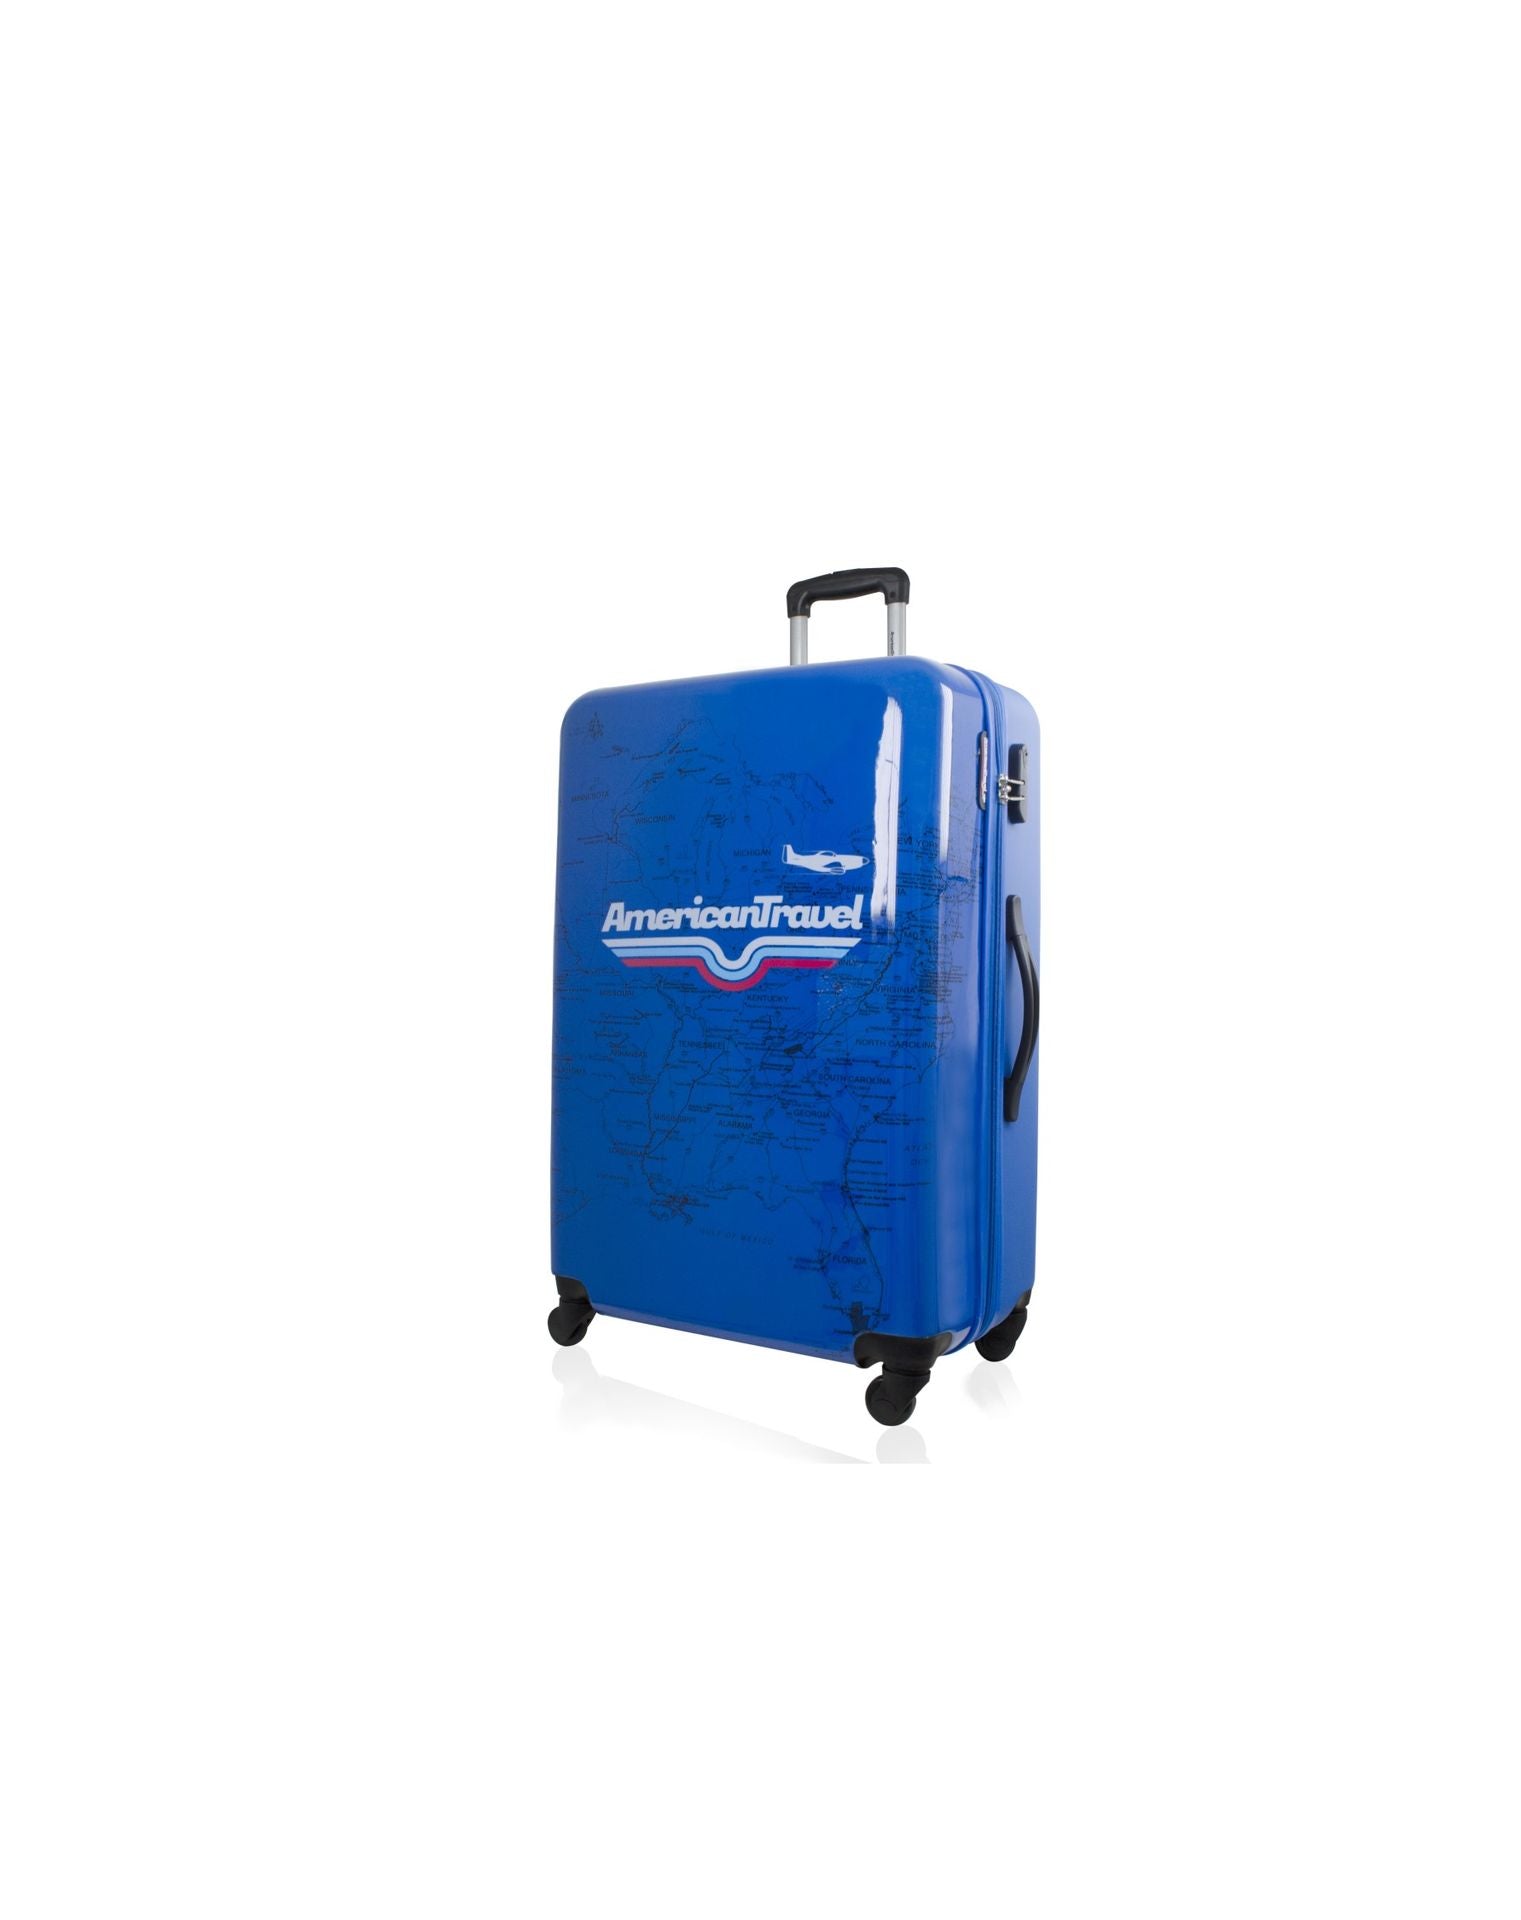 Valise Cabine ABS/PC TIMES SQUARE  55 cm